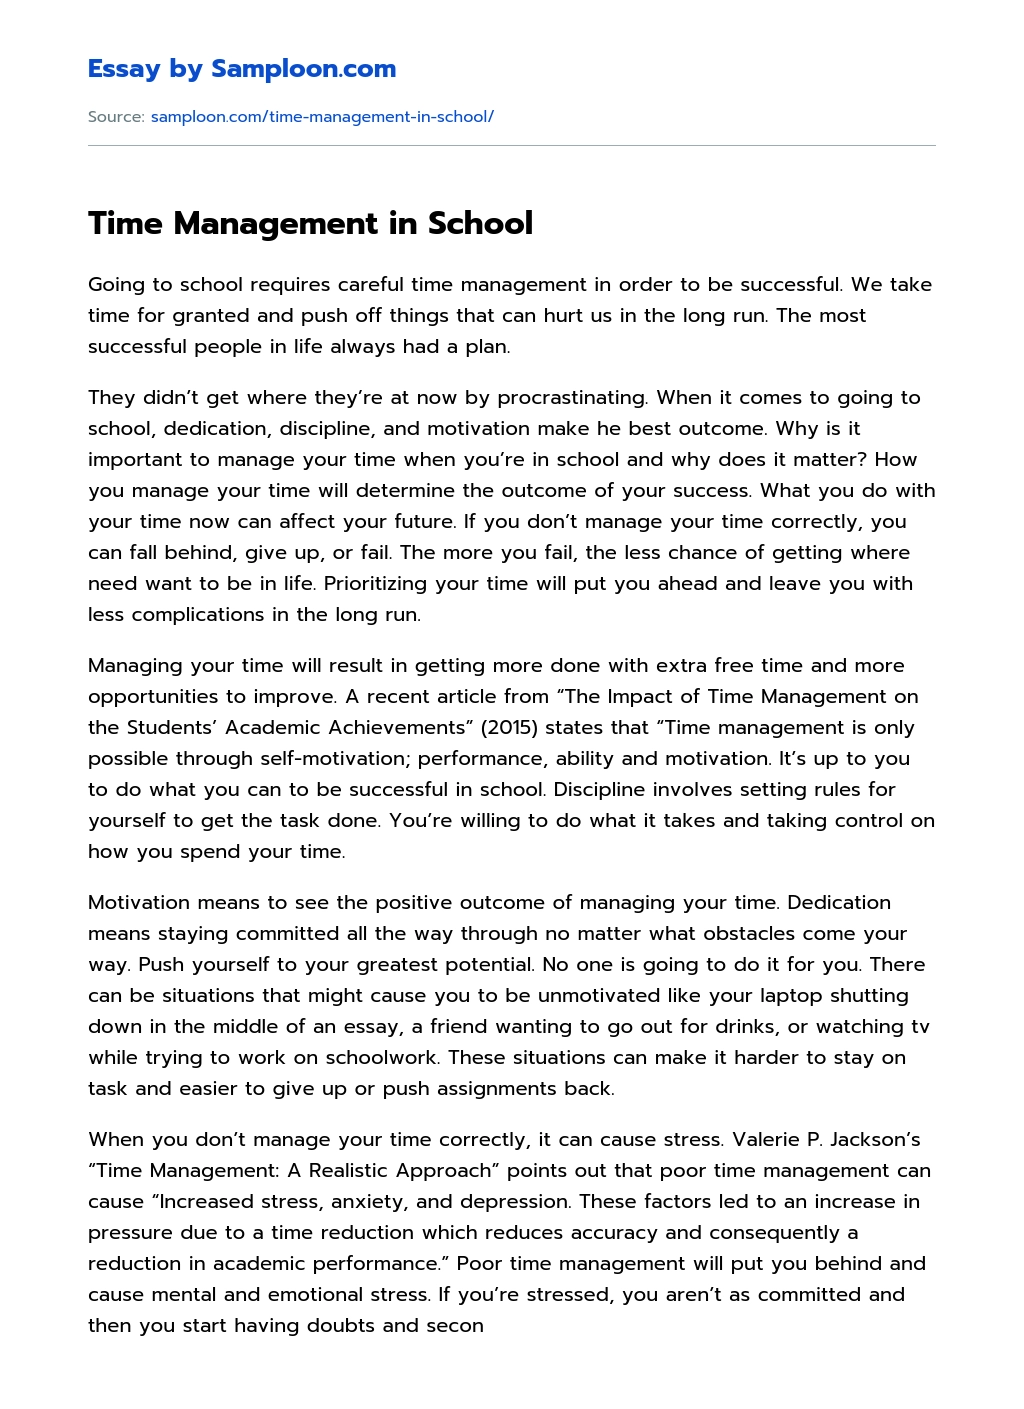 Time Management in School essay